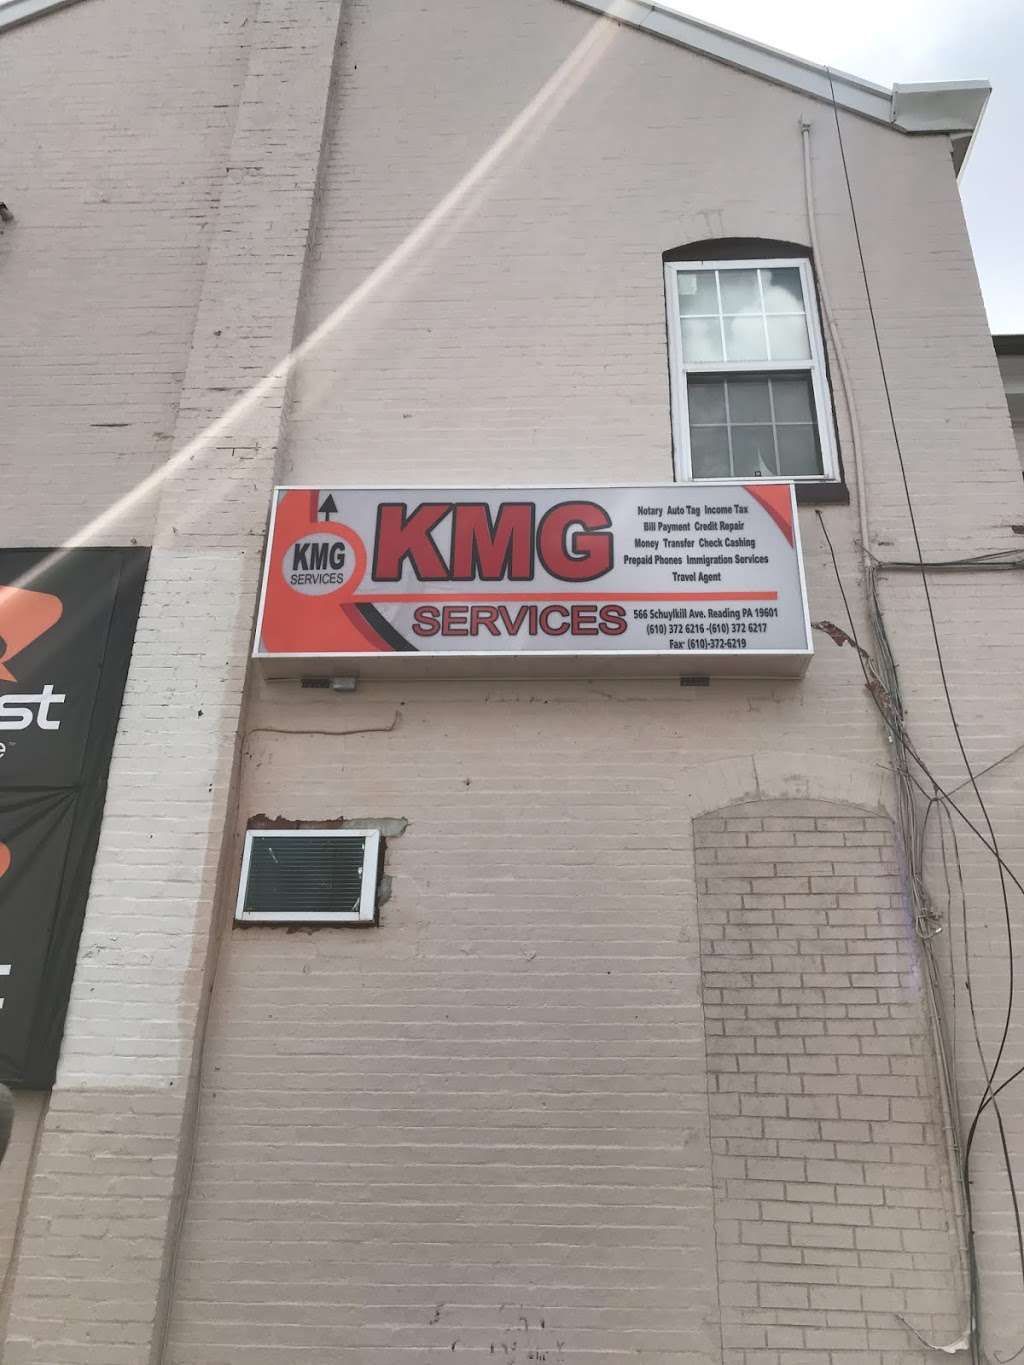 Kmg Services | 566 Schuylkill Ave, Reading, PA 19601 | Phone: (610) 372-6217